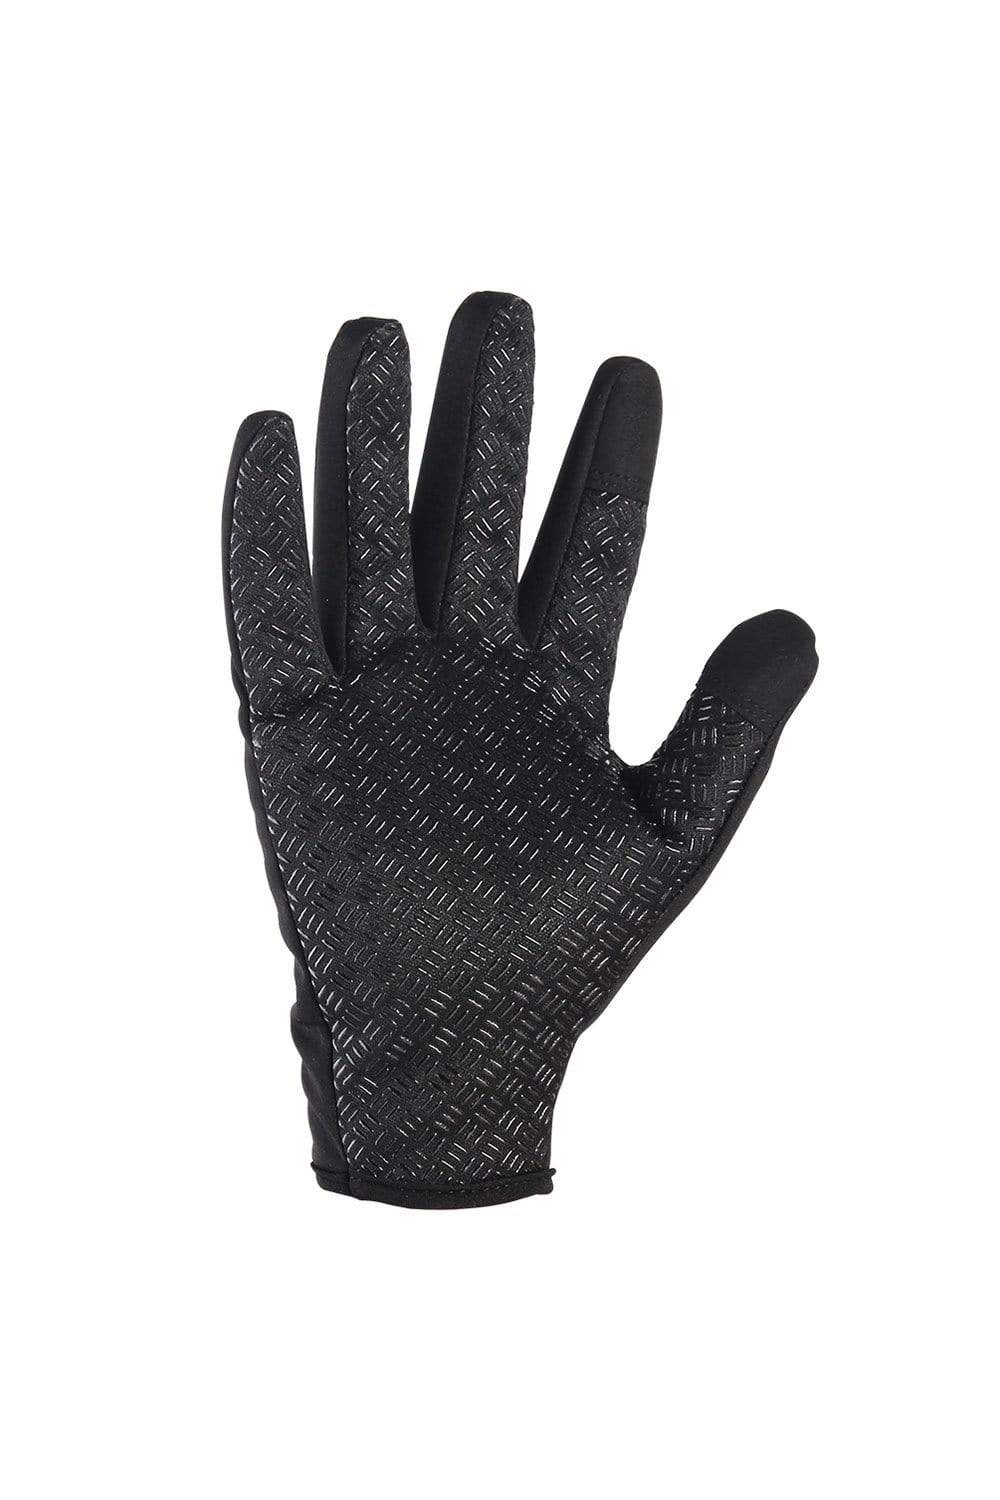 Warm Gloves Touch Screen Gloves Windproof Gloves for Hiking, Running, Cycling Gloves MIER